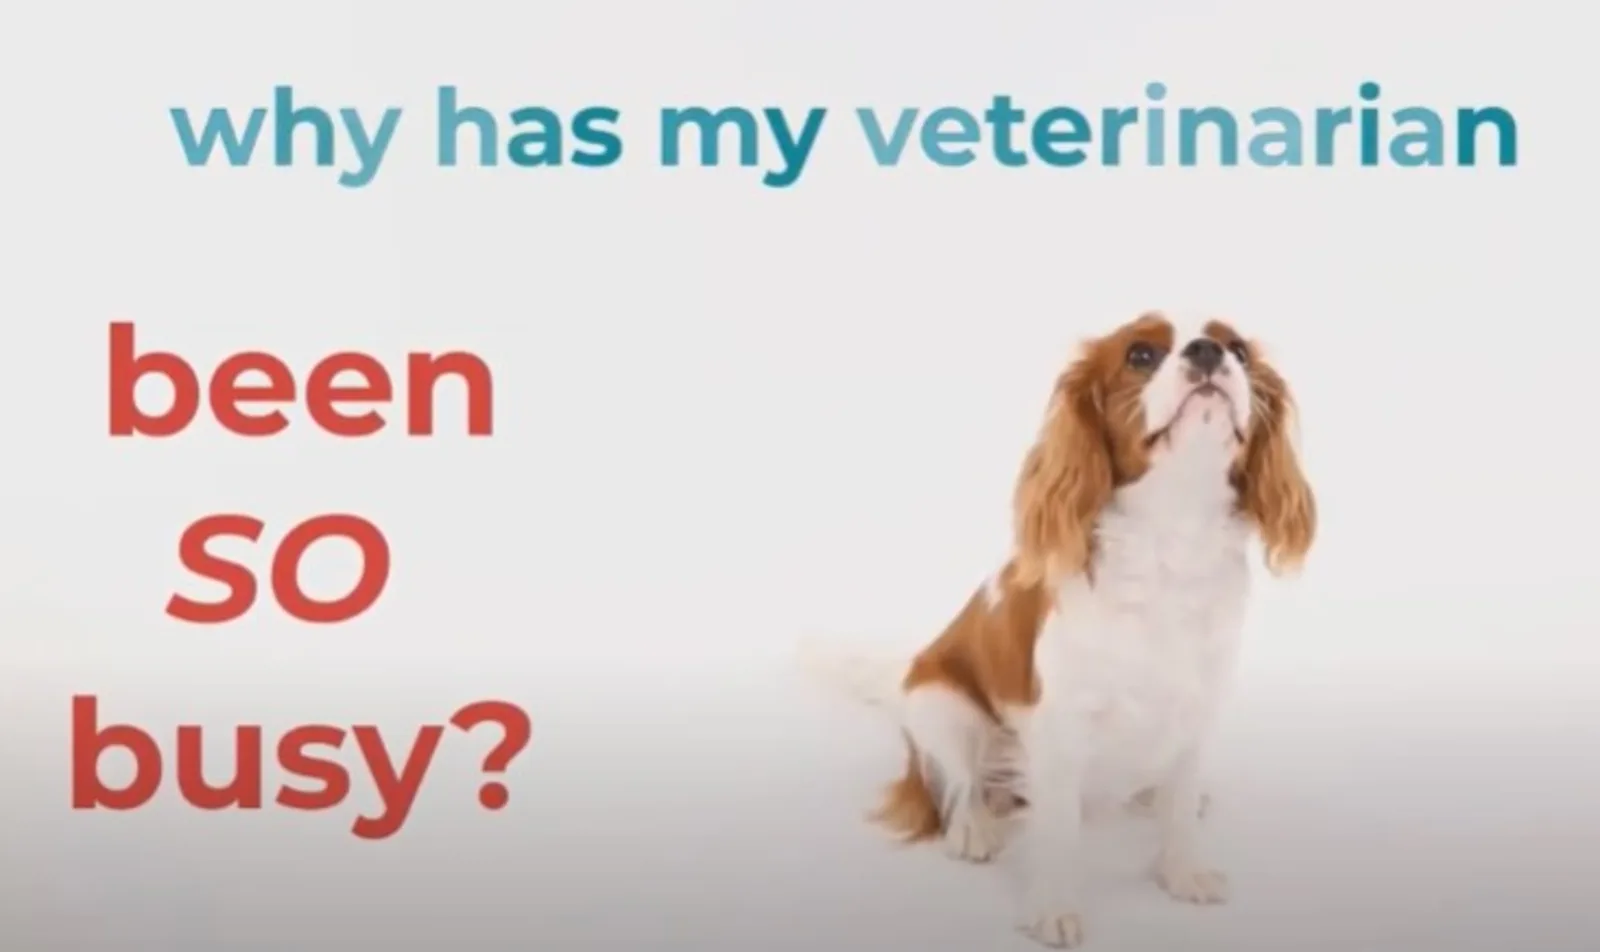  Countryside Animal Hospital of Tempe -  Why has my veterinarian been SO busy?